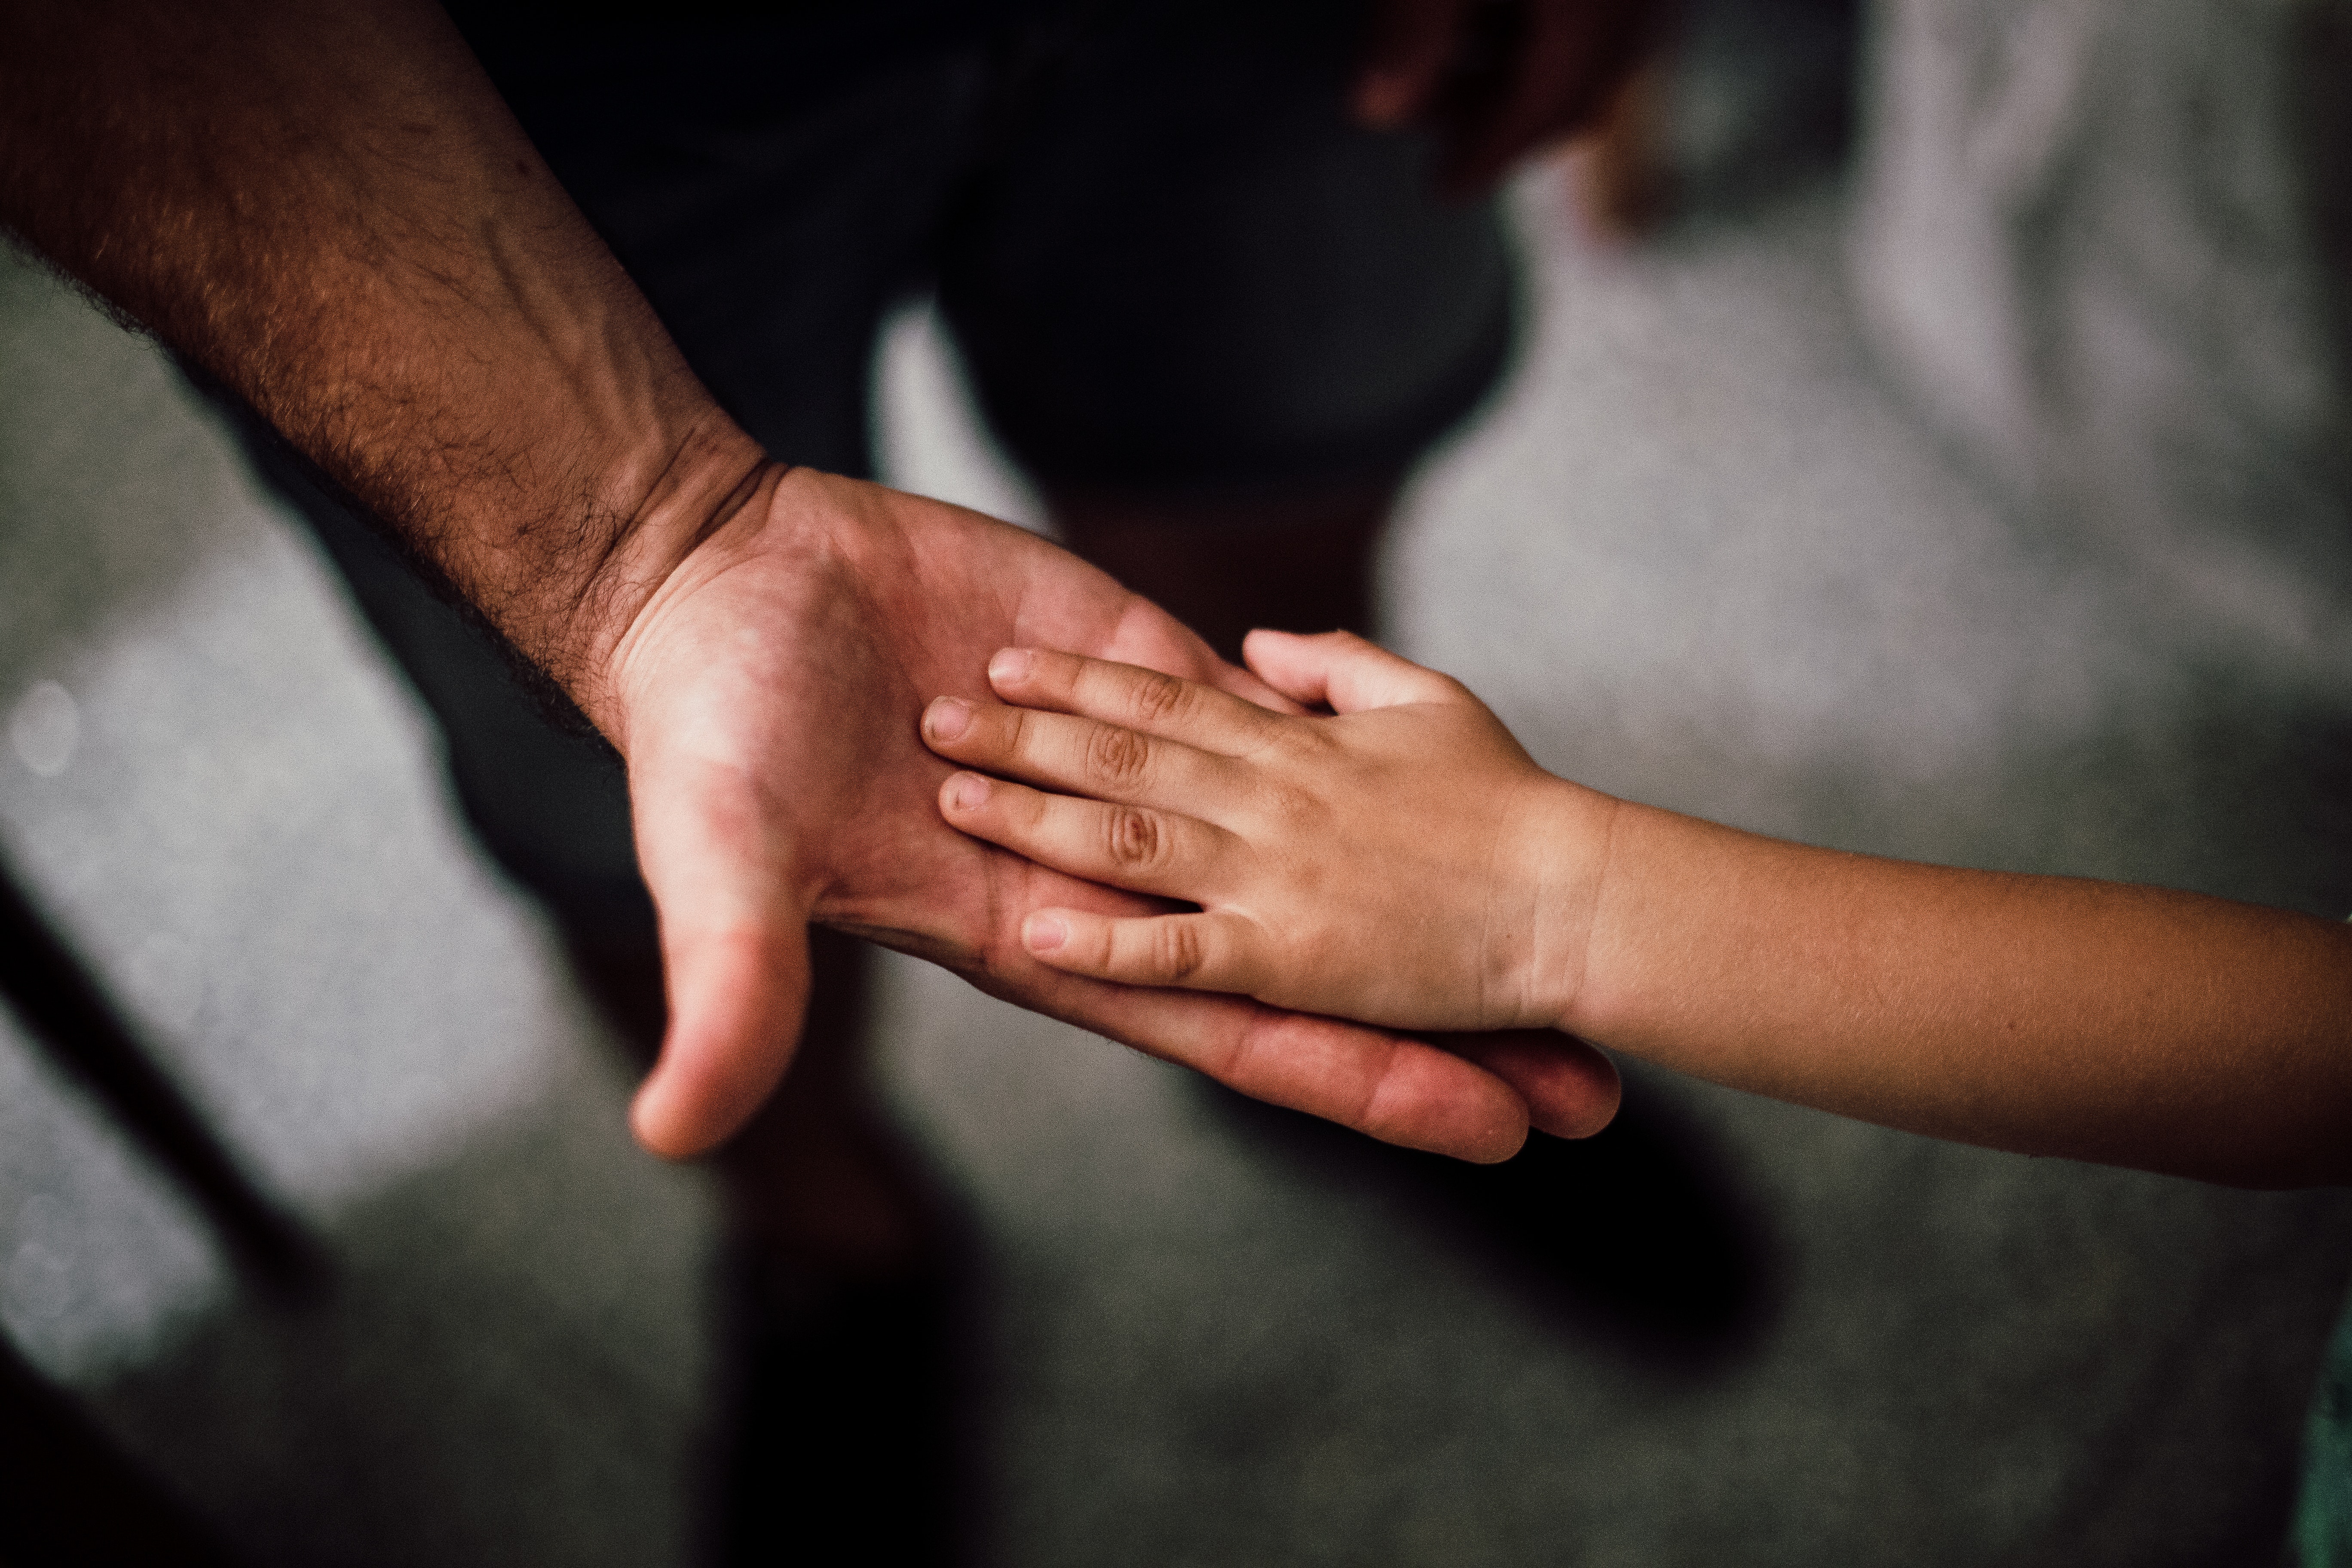 In c4c's advice process, experts can include patients and their parents. Image by Juan Pablo Serrano Arenas via Pexels.